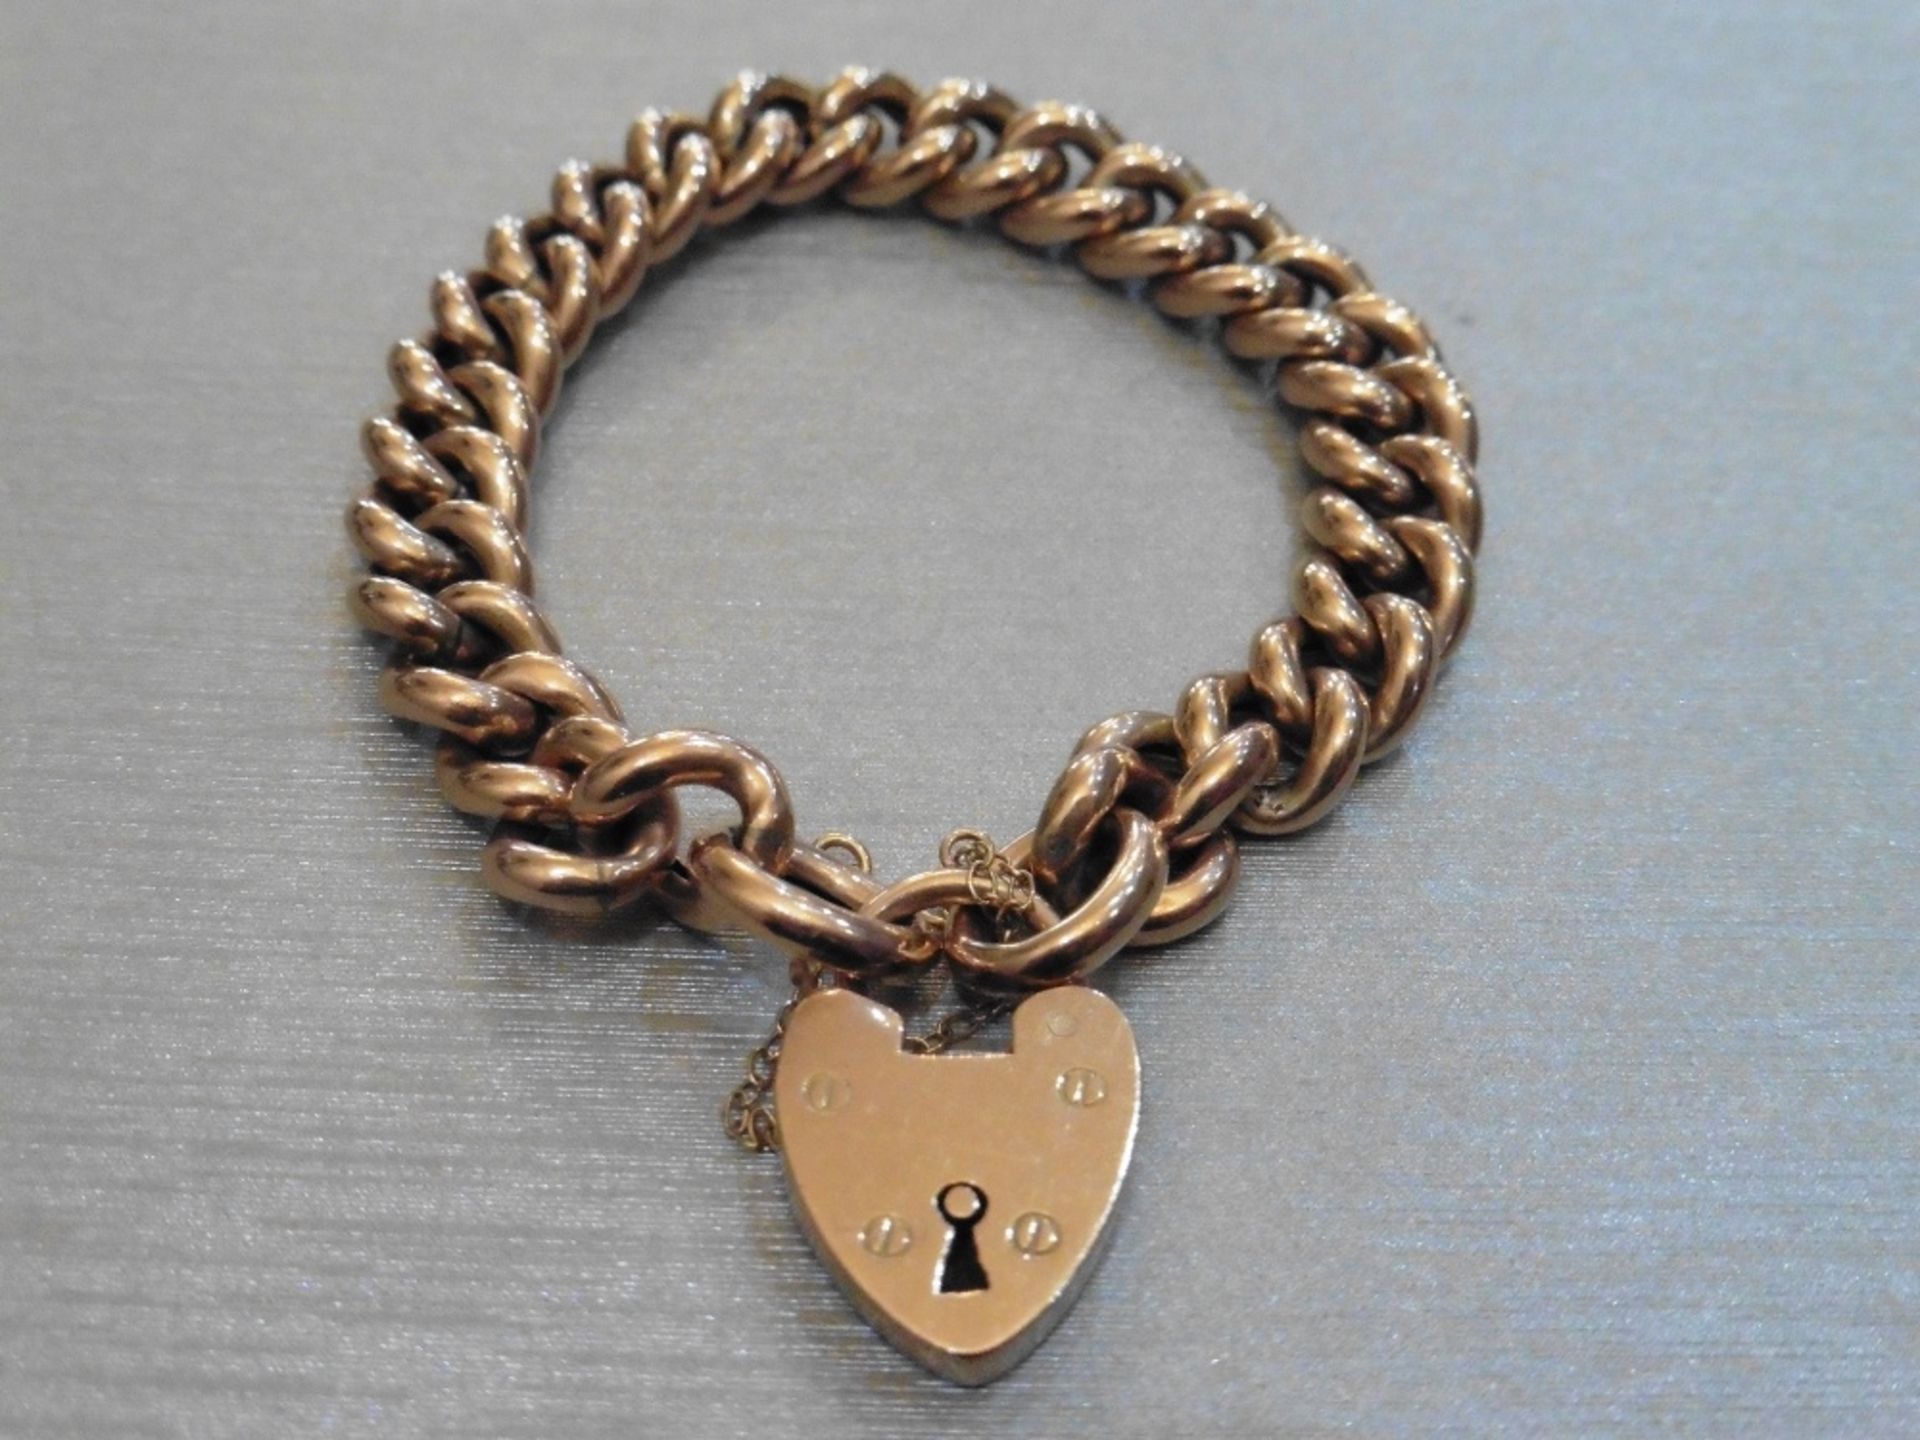 Pre-owned 9ct rose gold victorian style bracelet.  Hollow links with heart locket fastner and safety